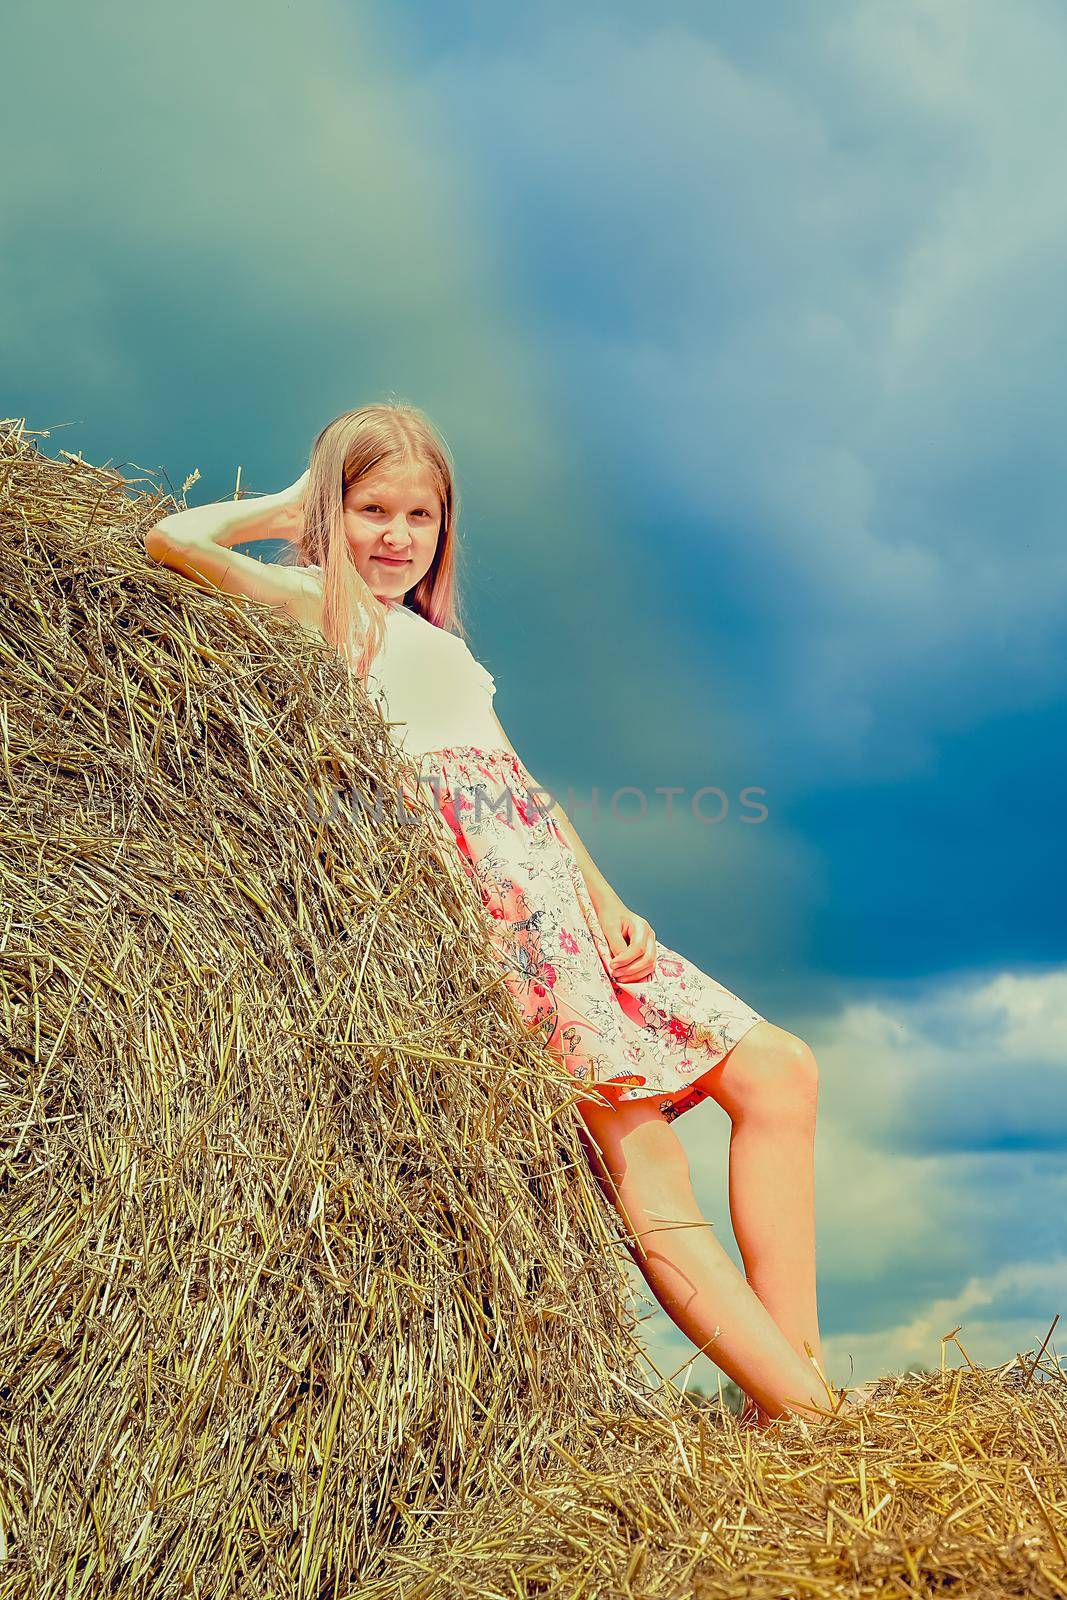 A girl with long flowing hair in a pink dress climbed on large bales of straw